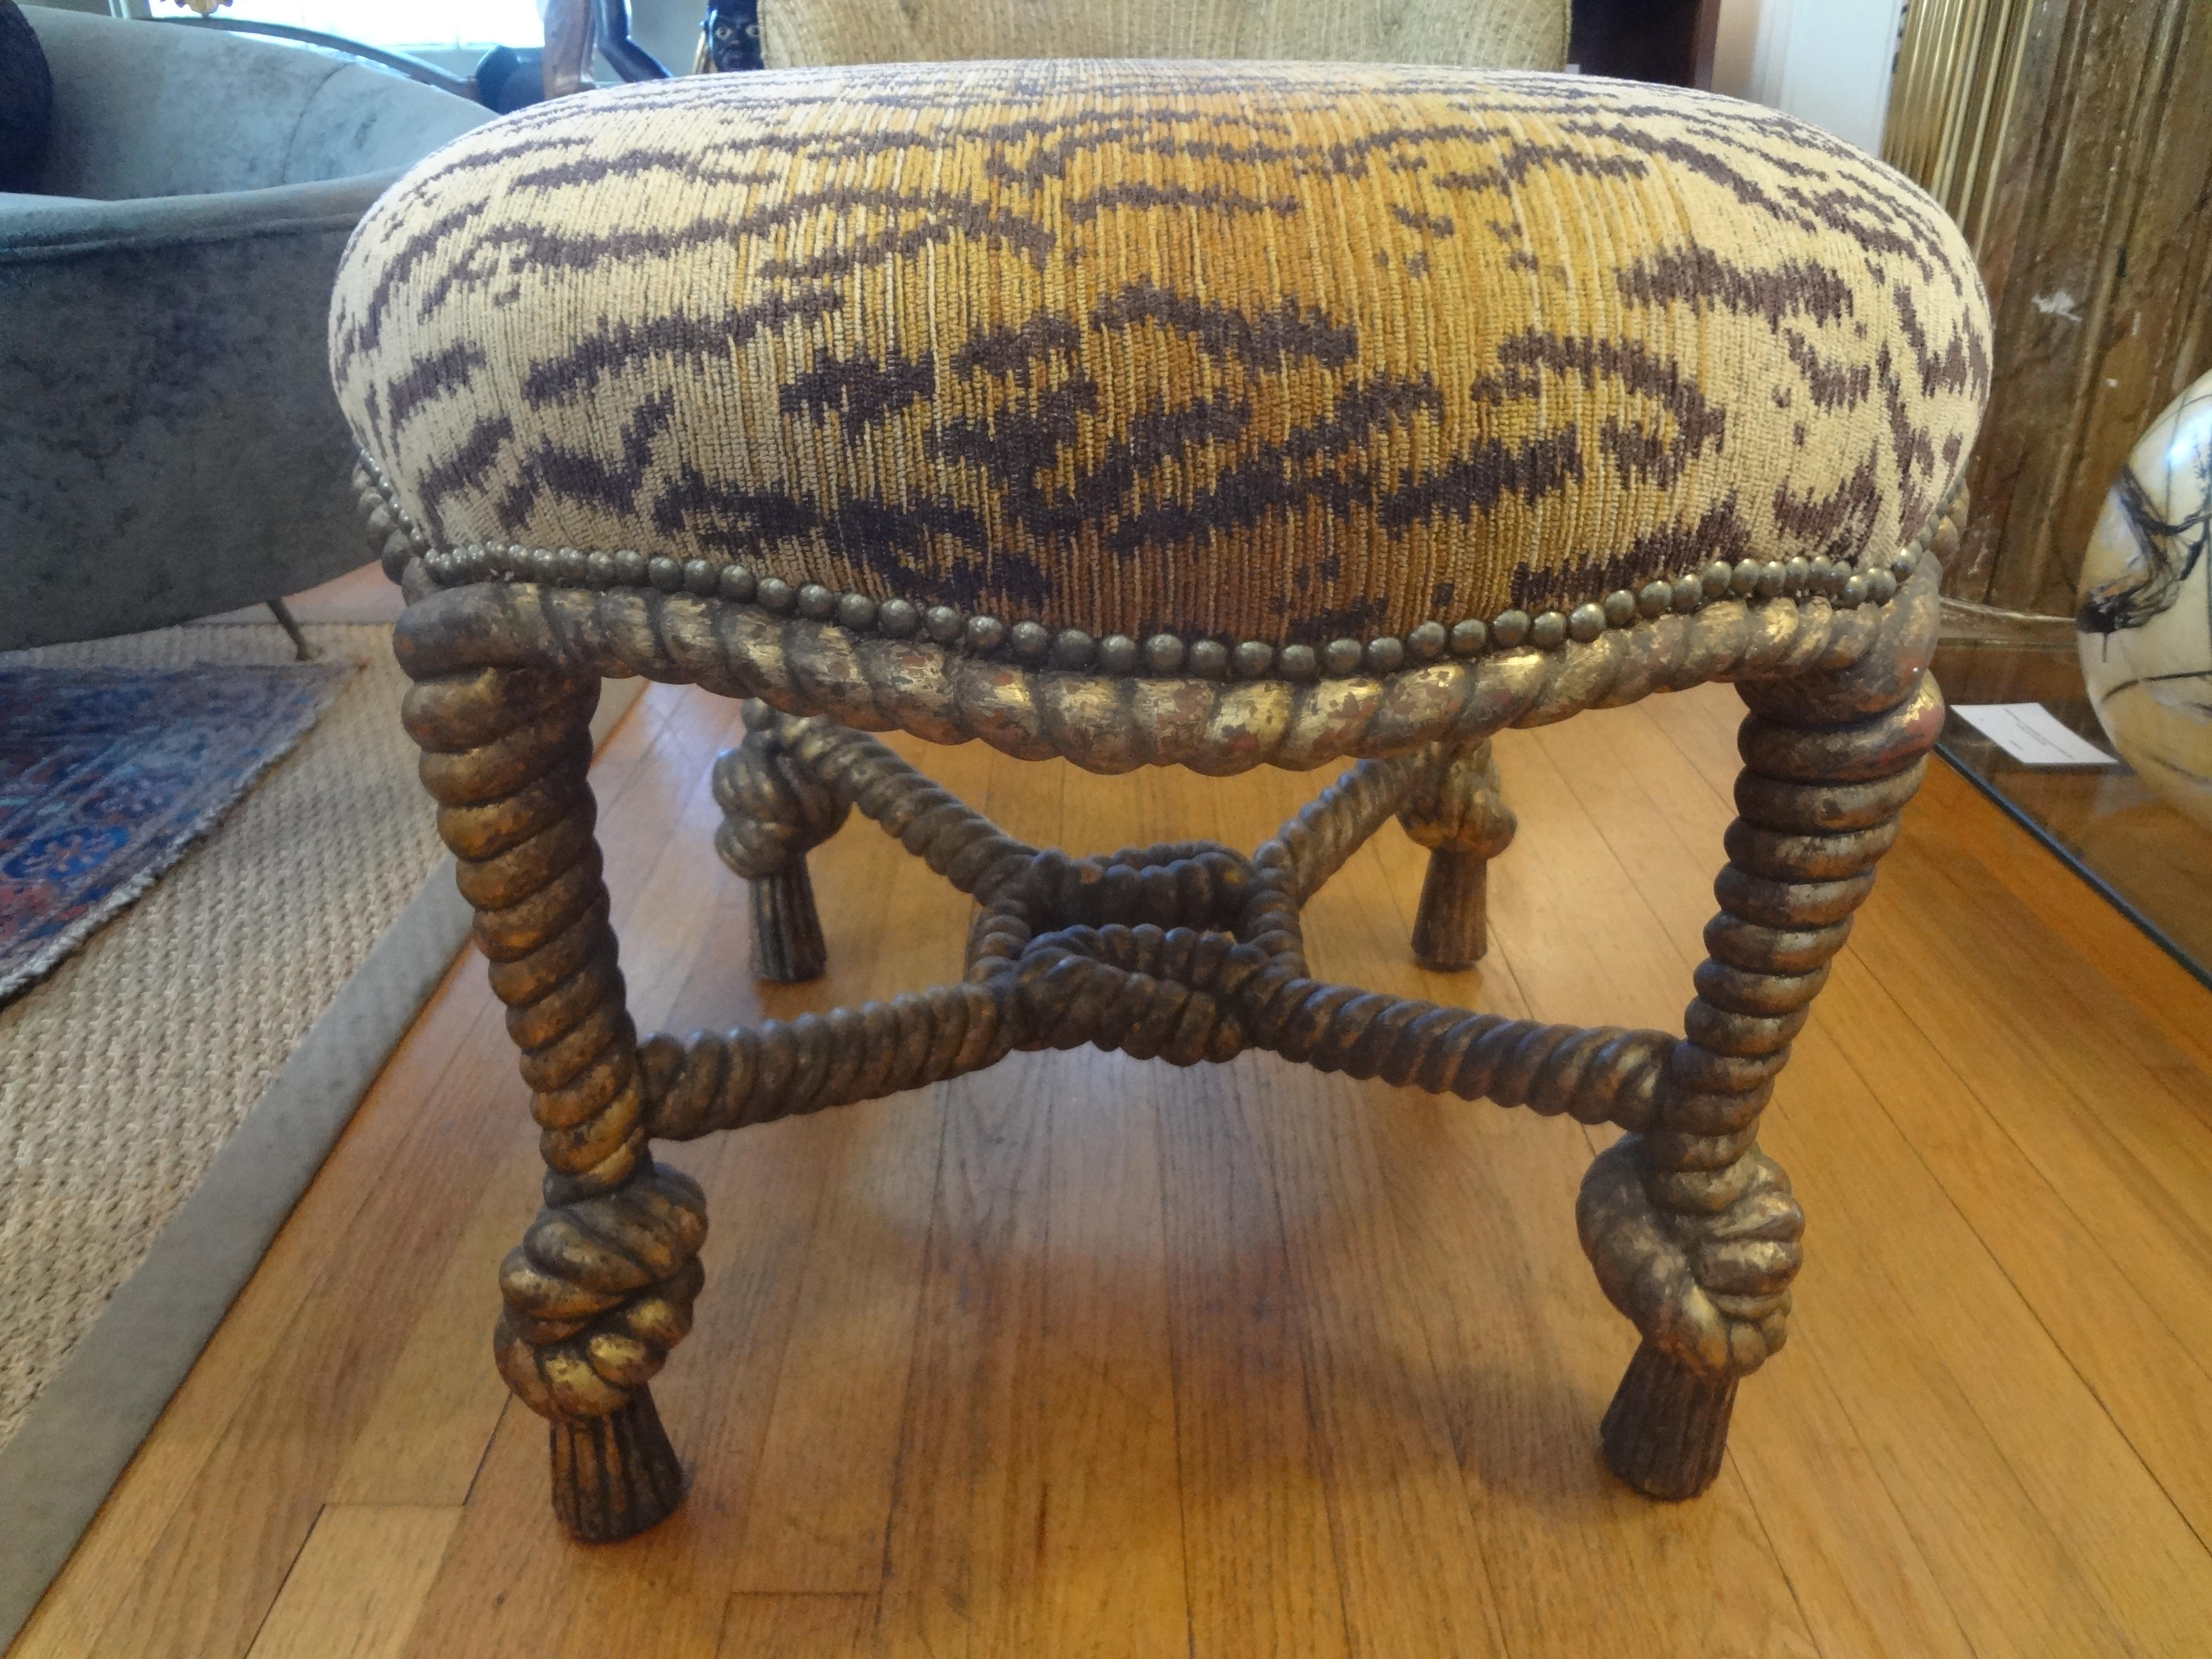 Stunning Italian A.M.E. Fournier style, Louis XVI style, or Napoleon III style carved giltwood knotted rope and tassel ottoman. This large and comfortable ottoman, stool, bench or tabouret is currently upholstered in leopard chenille fabric with